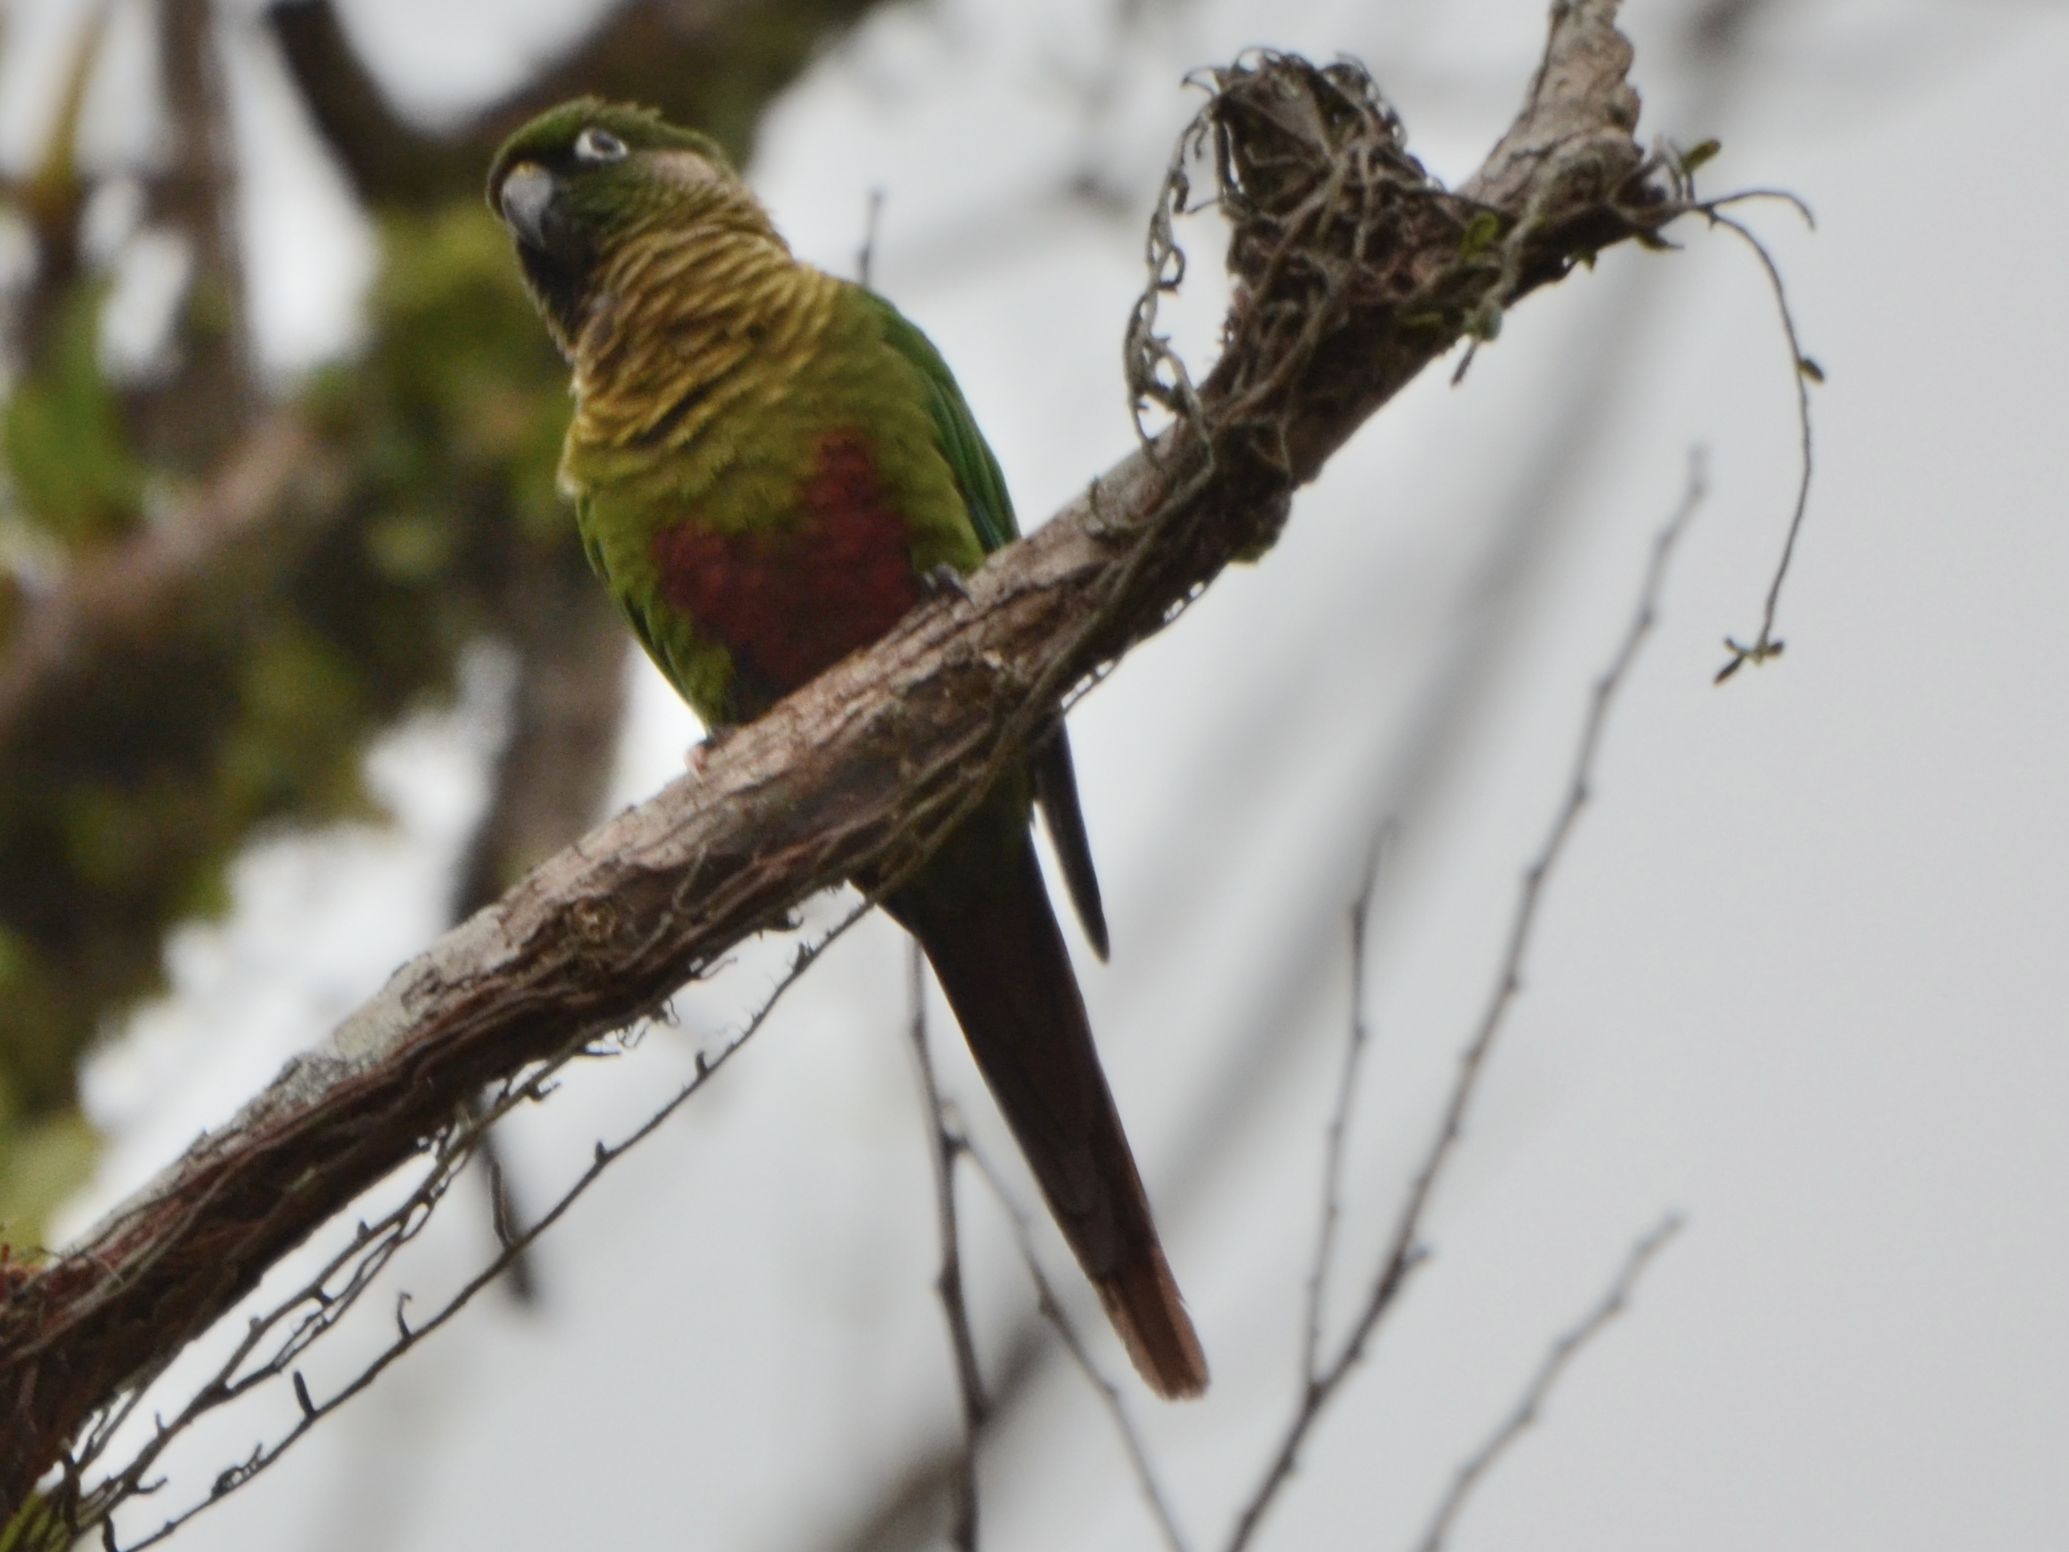 Click picture to see more Maroon-bellied Parakeets.